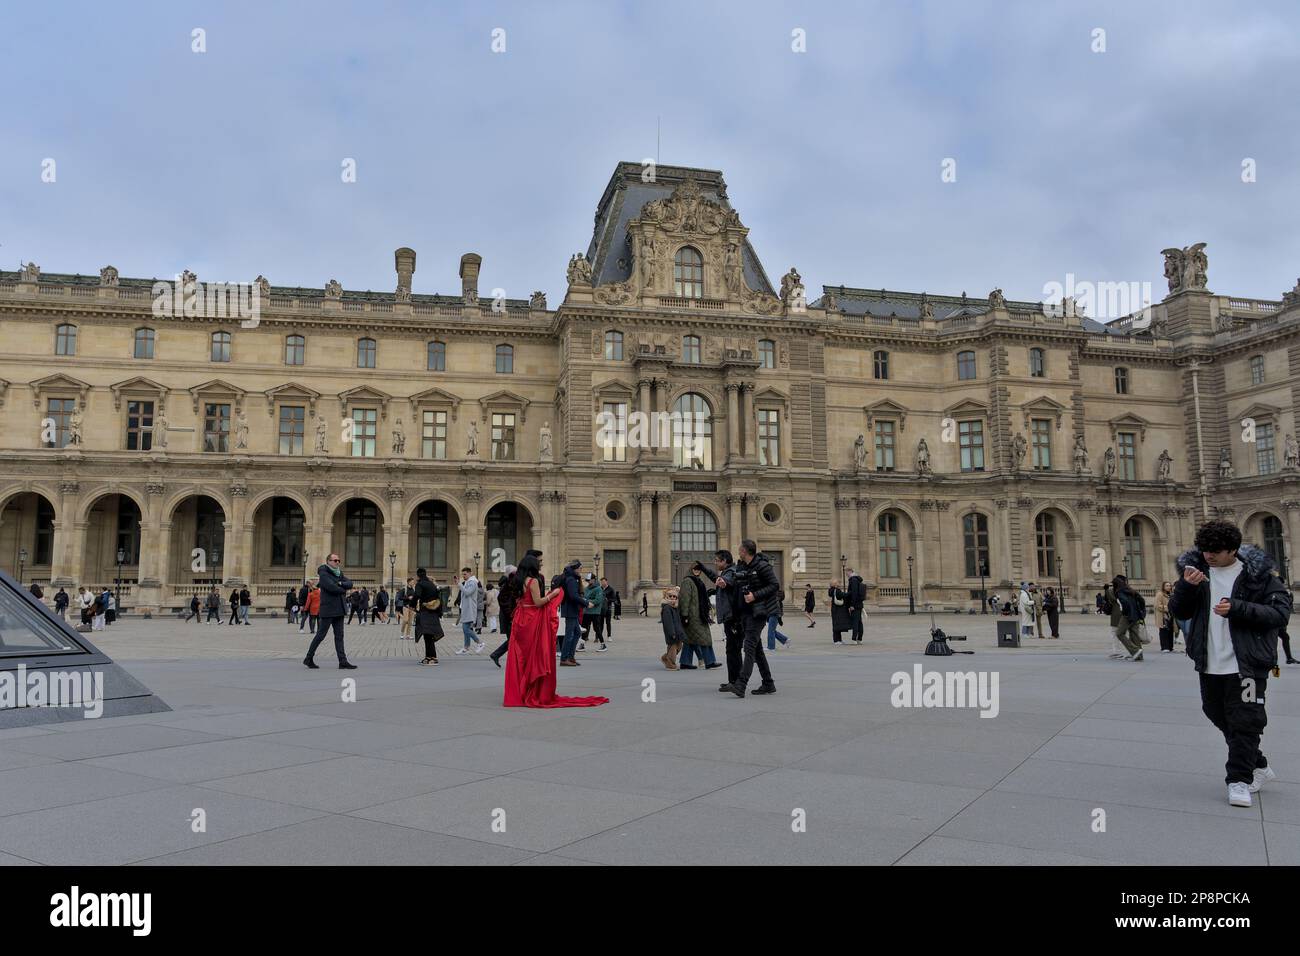 Couple in red getting photographed outside the Louvre museum with tourists around Stock Photo